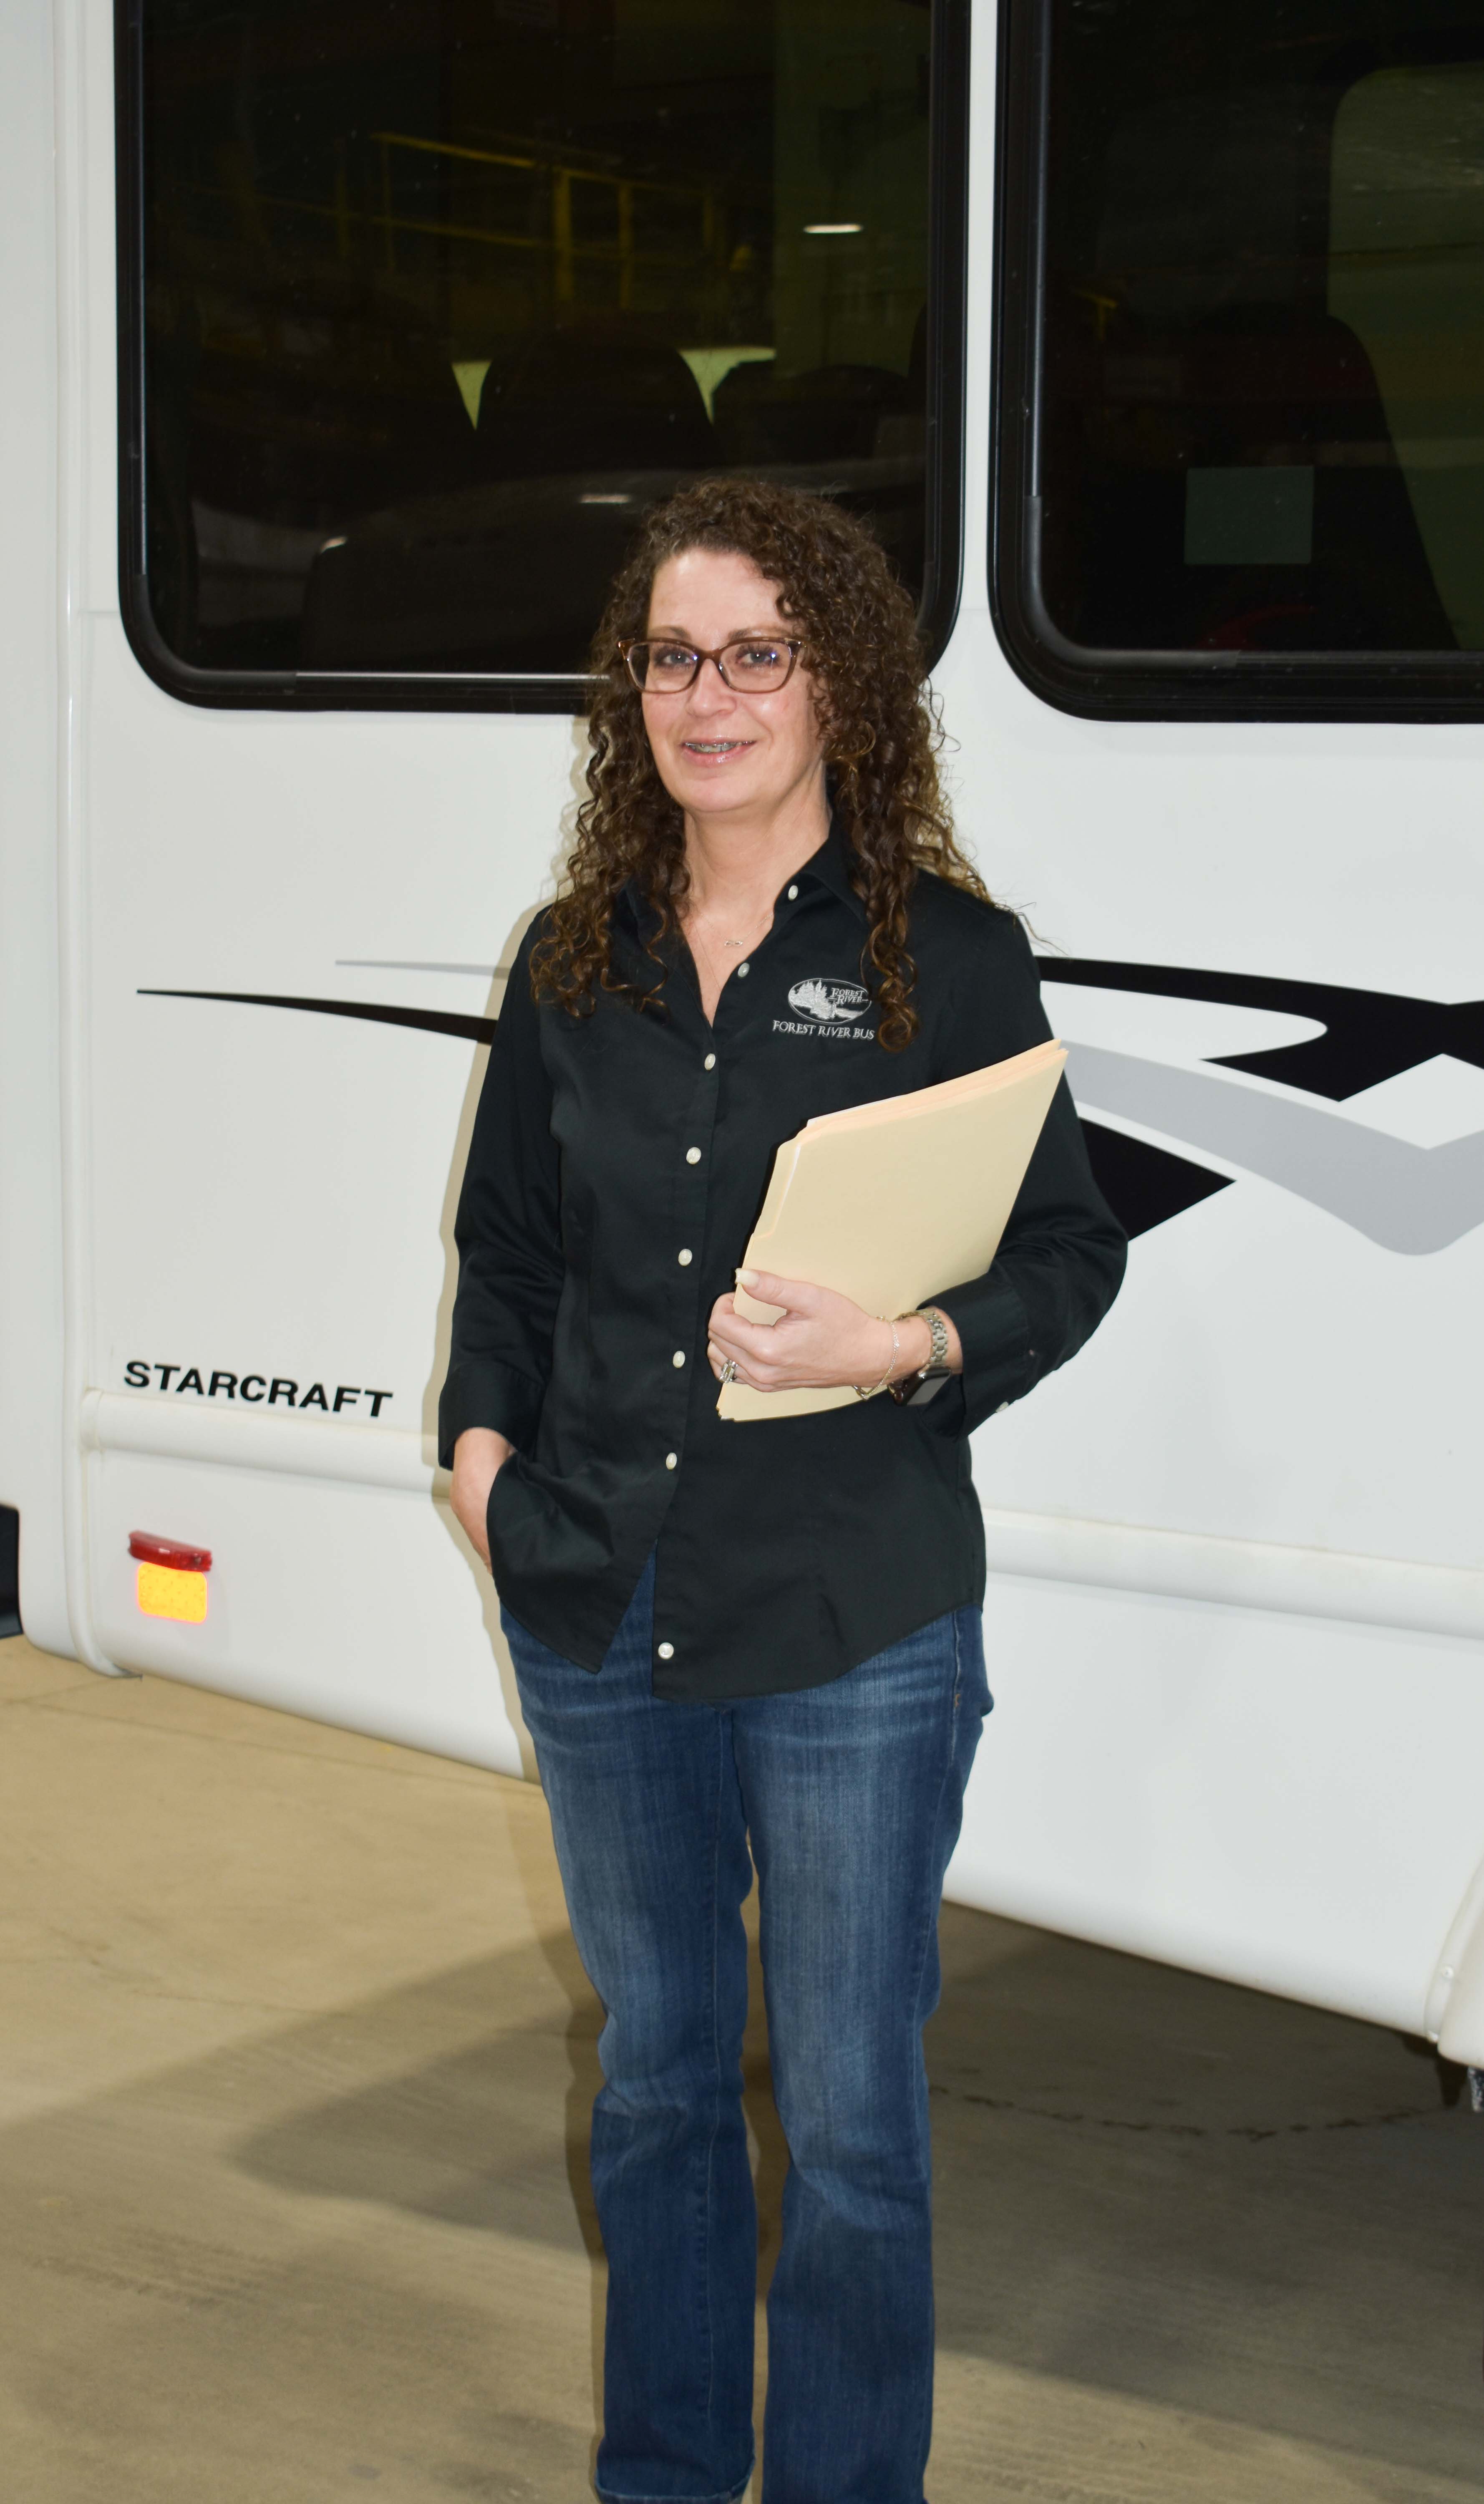 Image of Sara, a Forest River Bus Employee